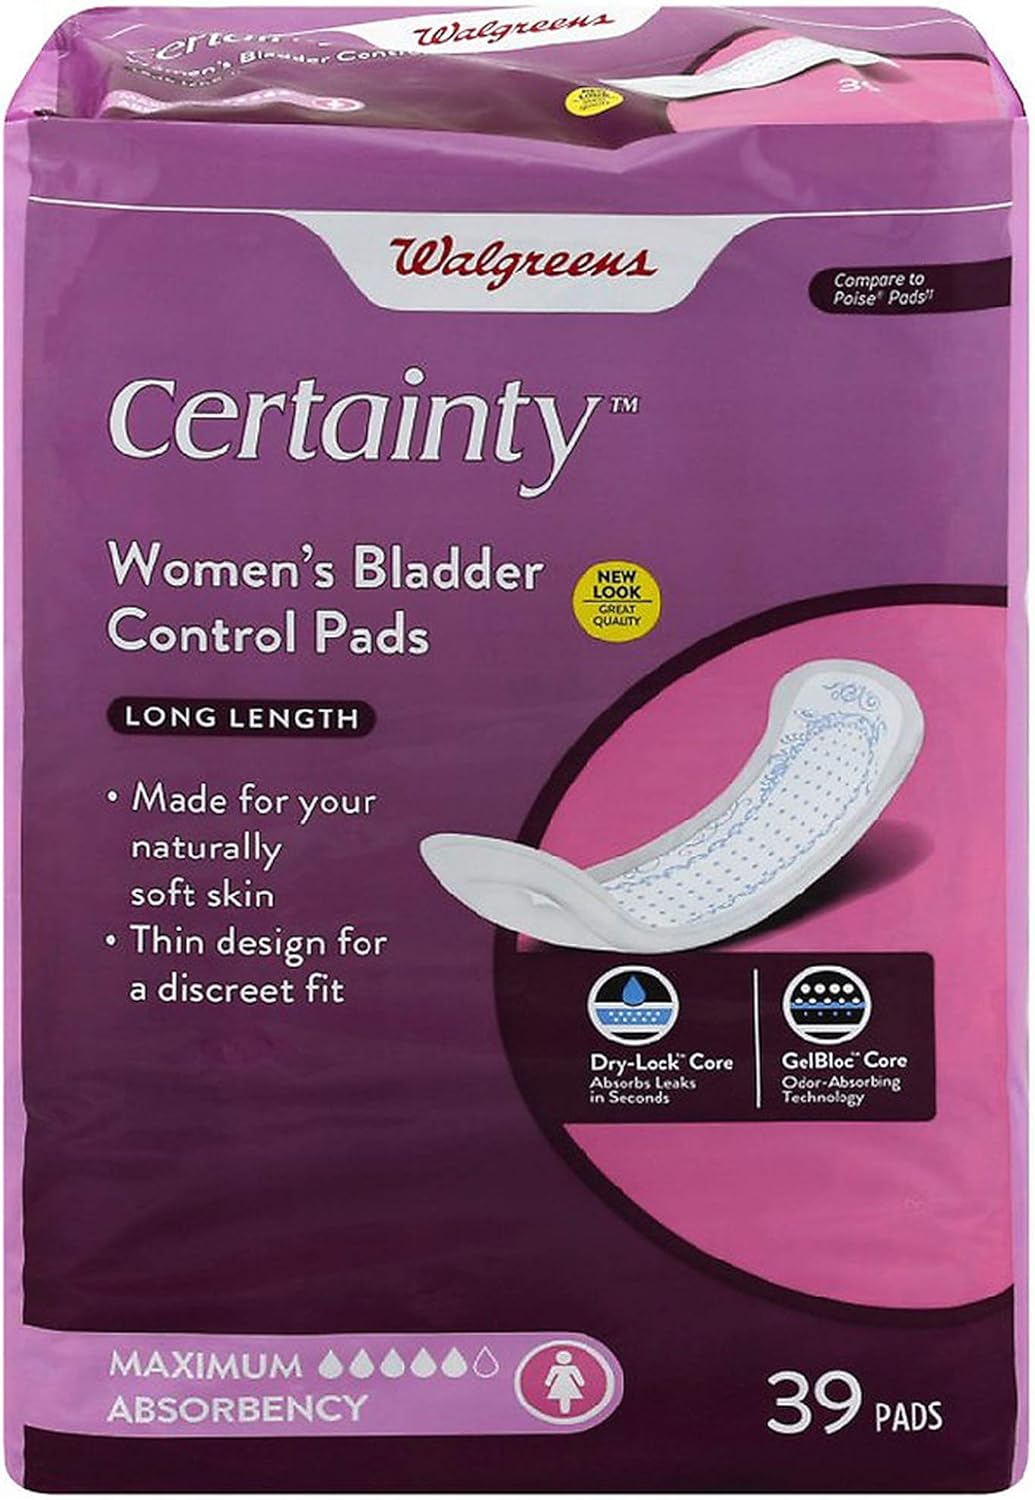 Walgreens Certainty Women's Bladder Control Pads, Maximum Absorbency, Long Length, 39 Count